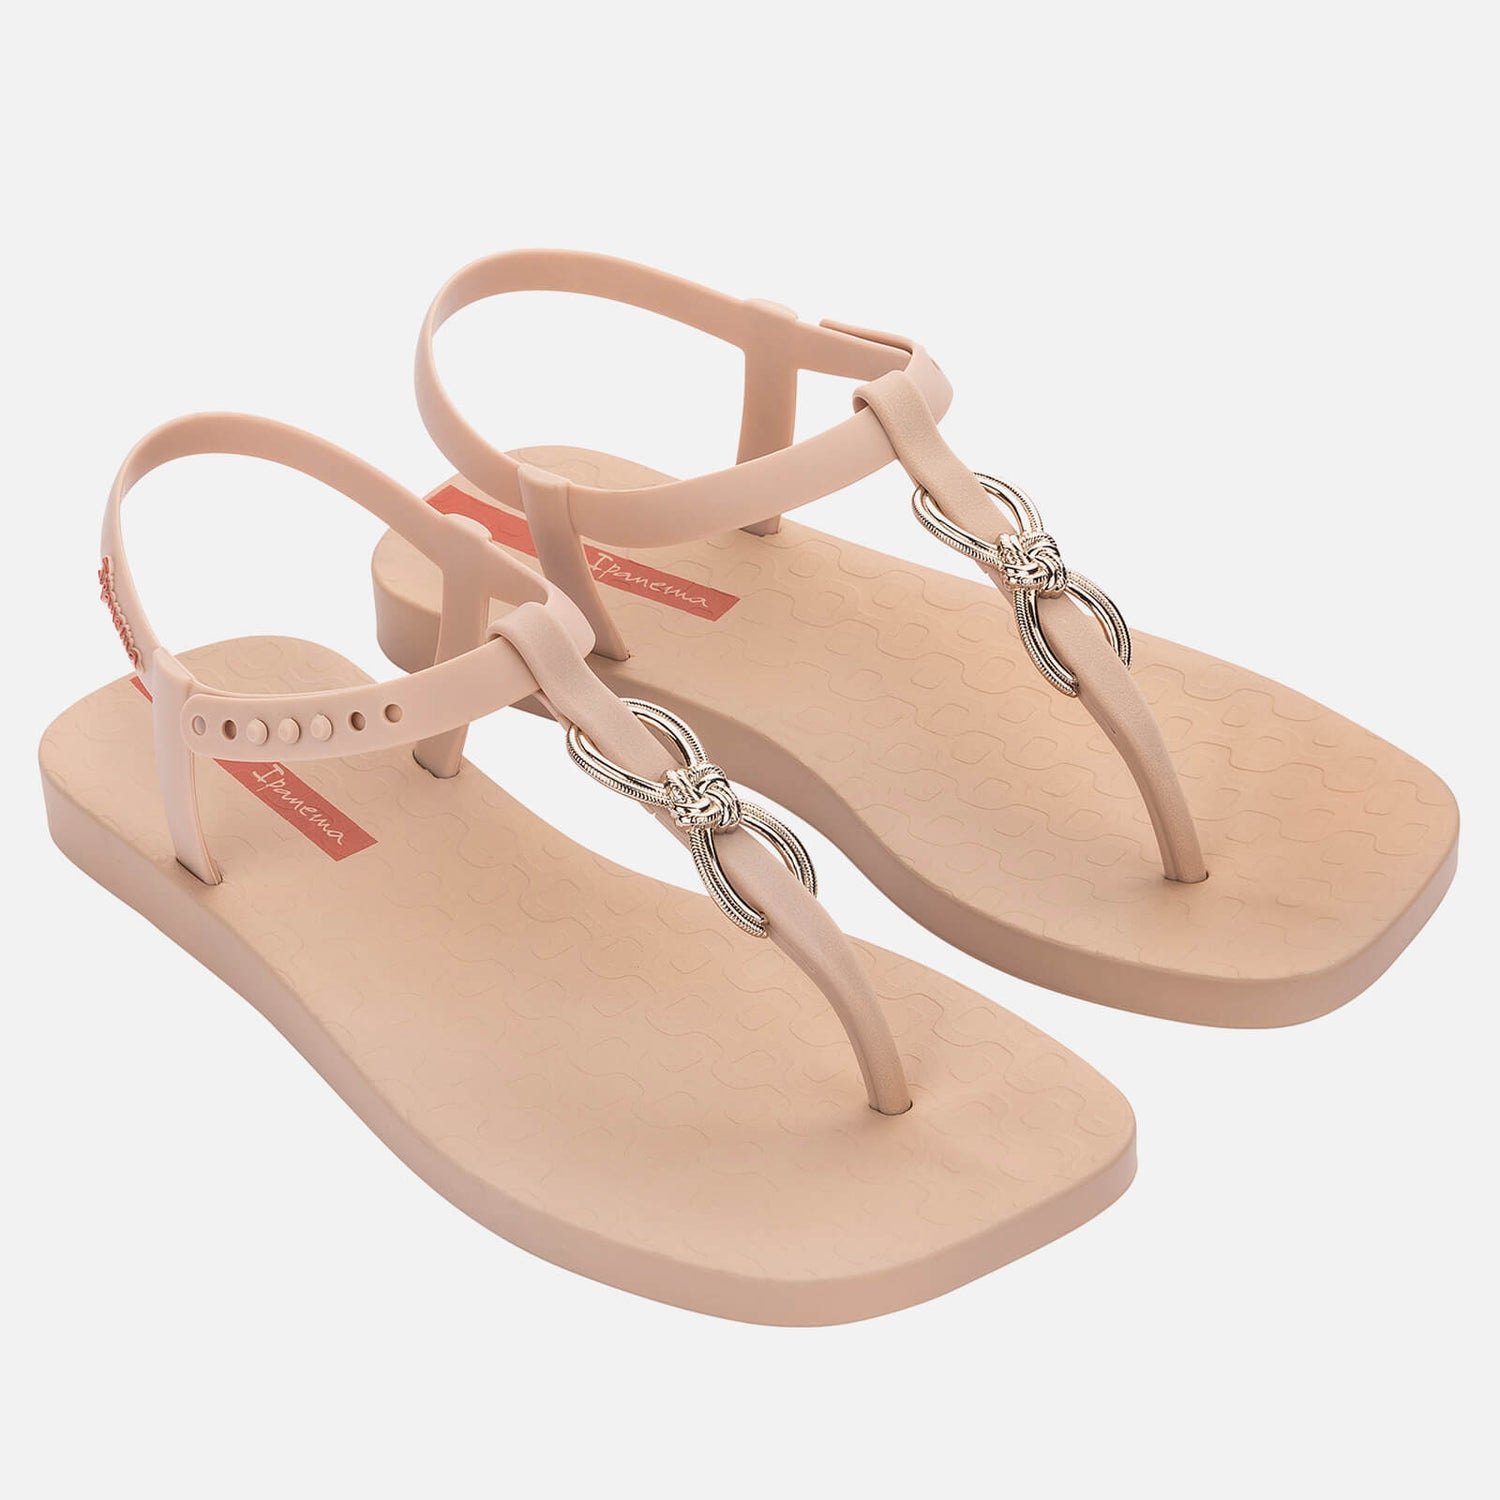 Ipanema Women's Premium Artisan Faux Suede and Rubber Sandals - UK 3